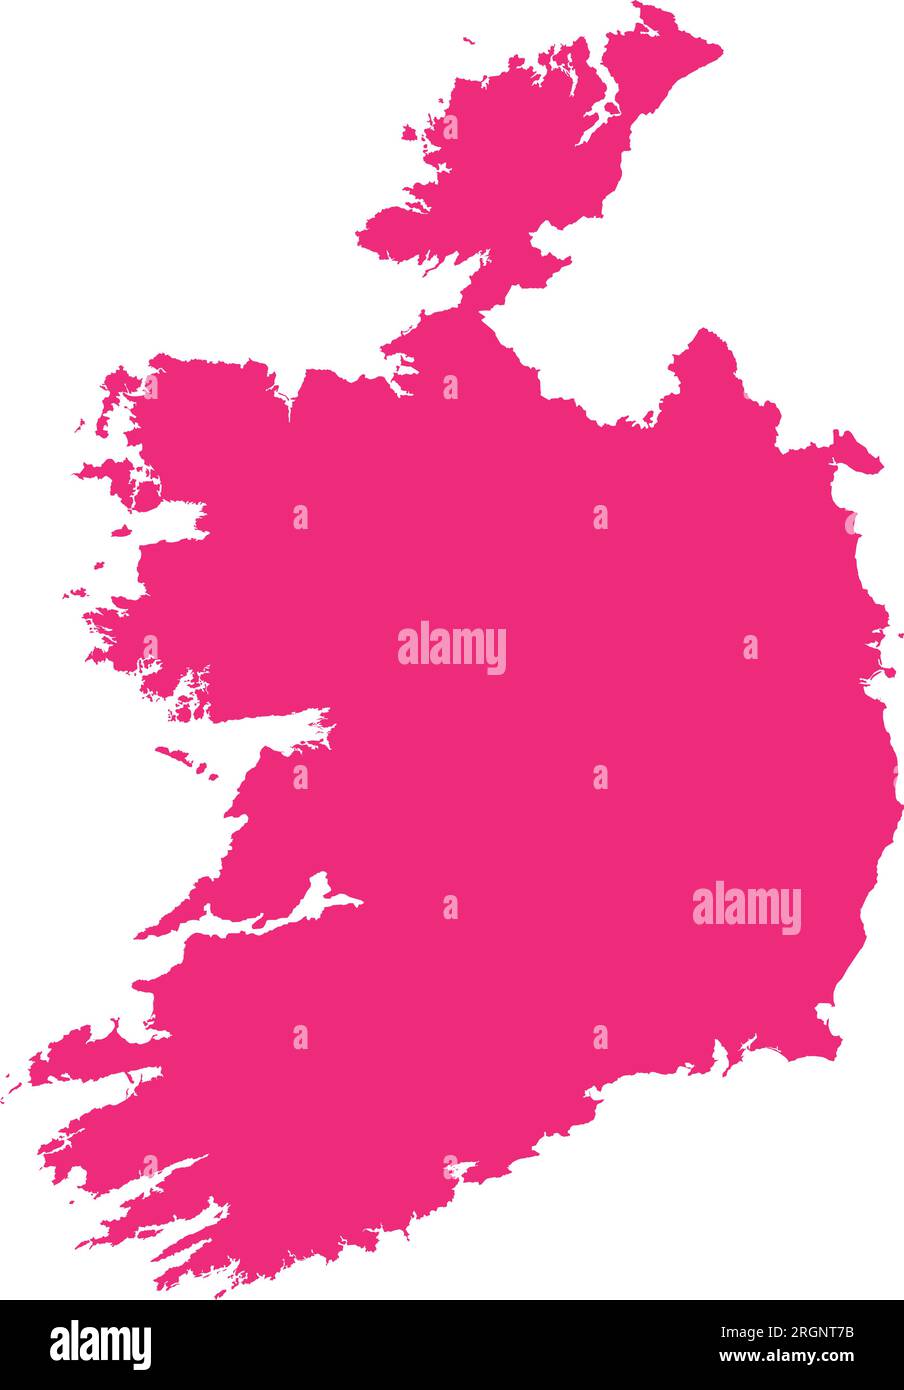 ROSE CMYK color map of REPUBLIC OF IRELAND Stock Vector